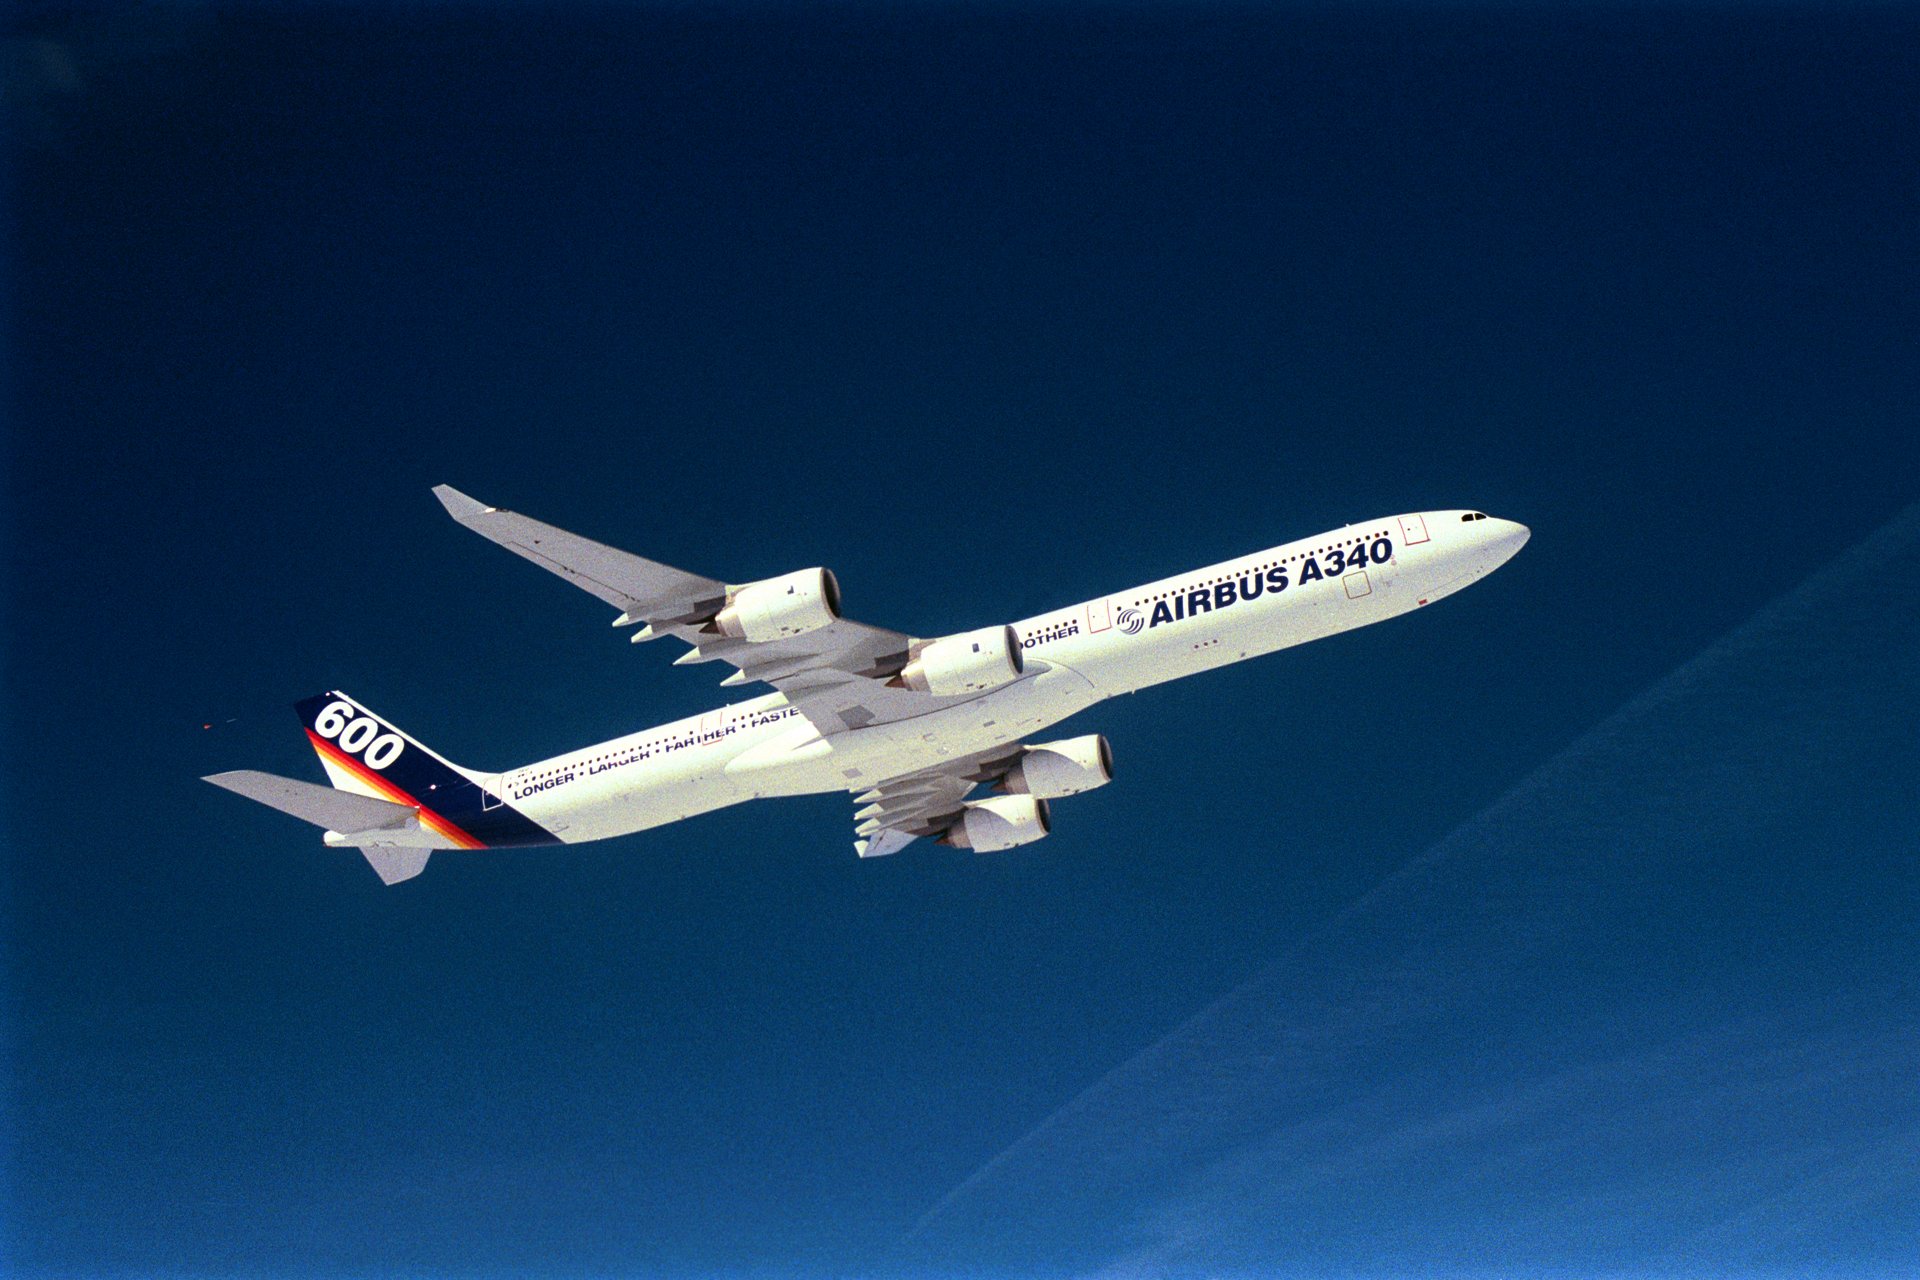 A340-600  Airbus first flight